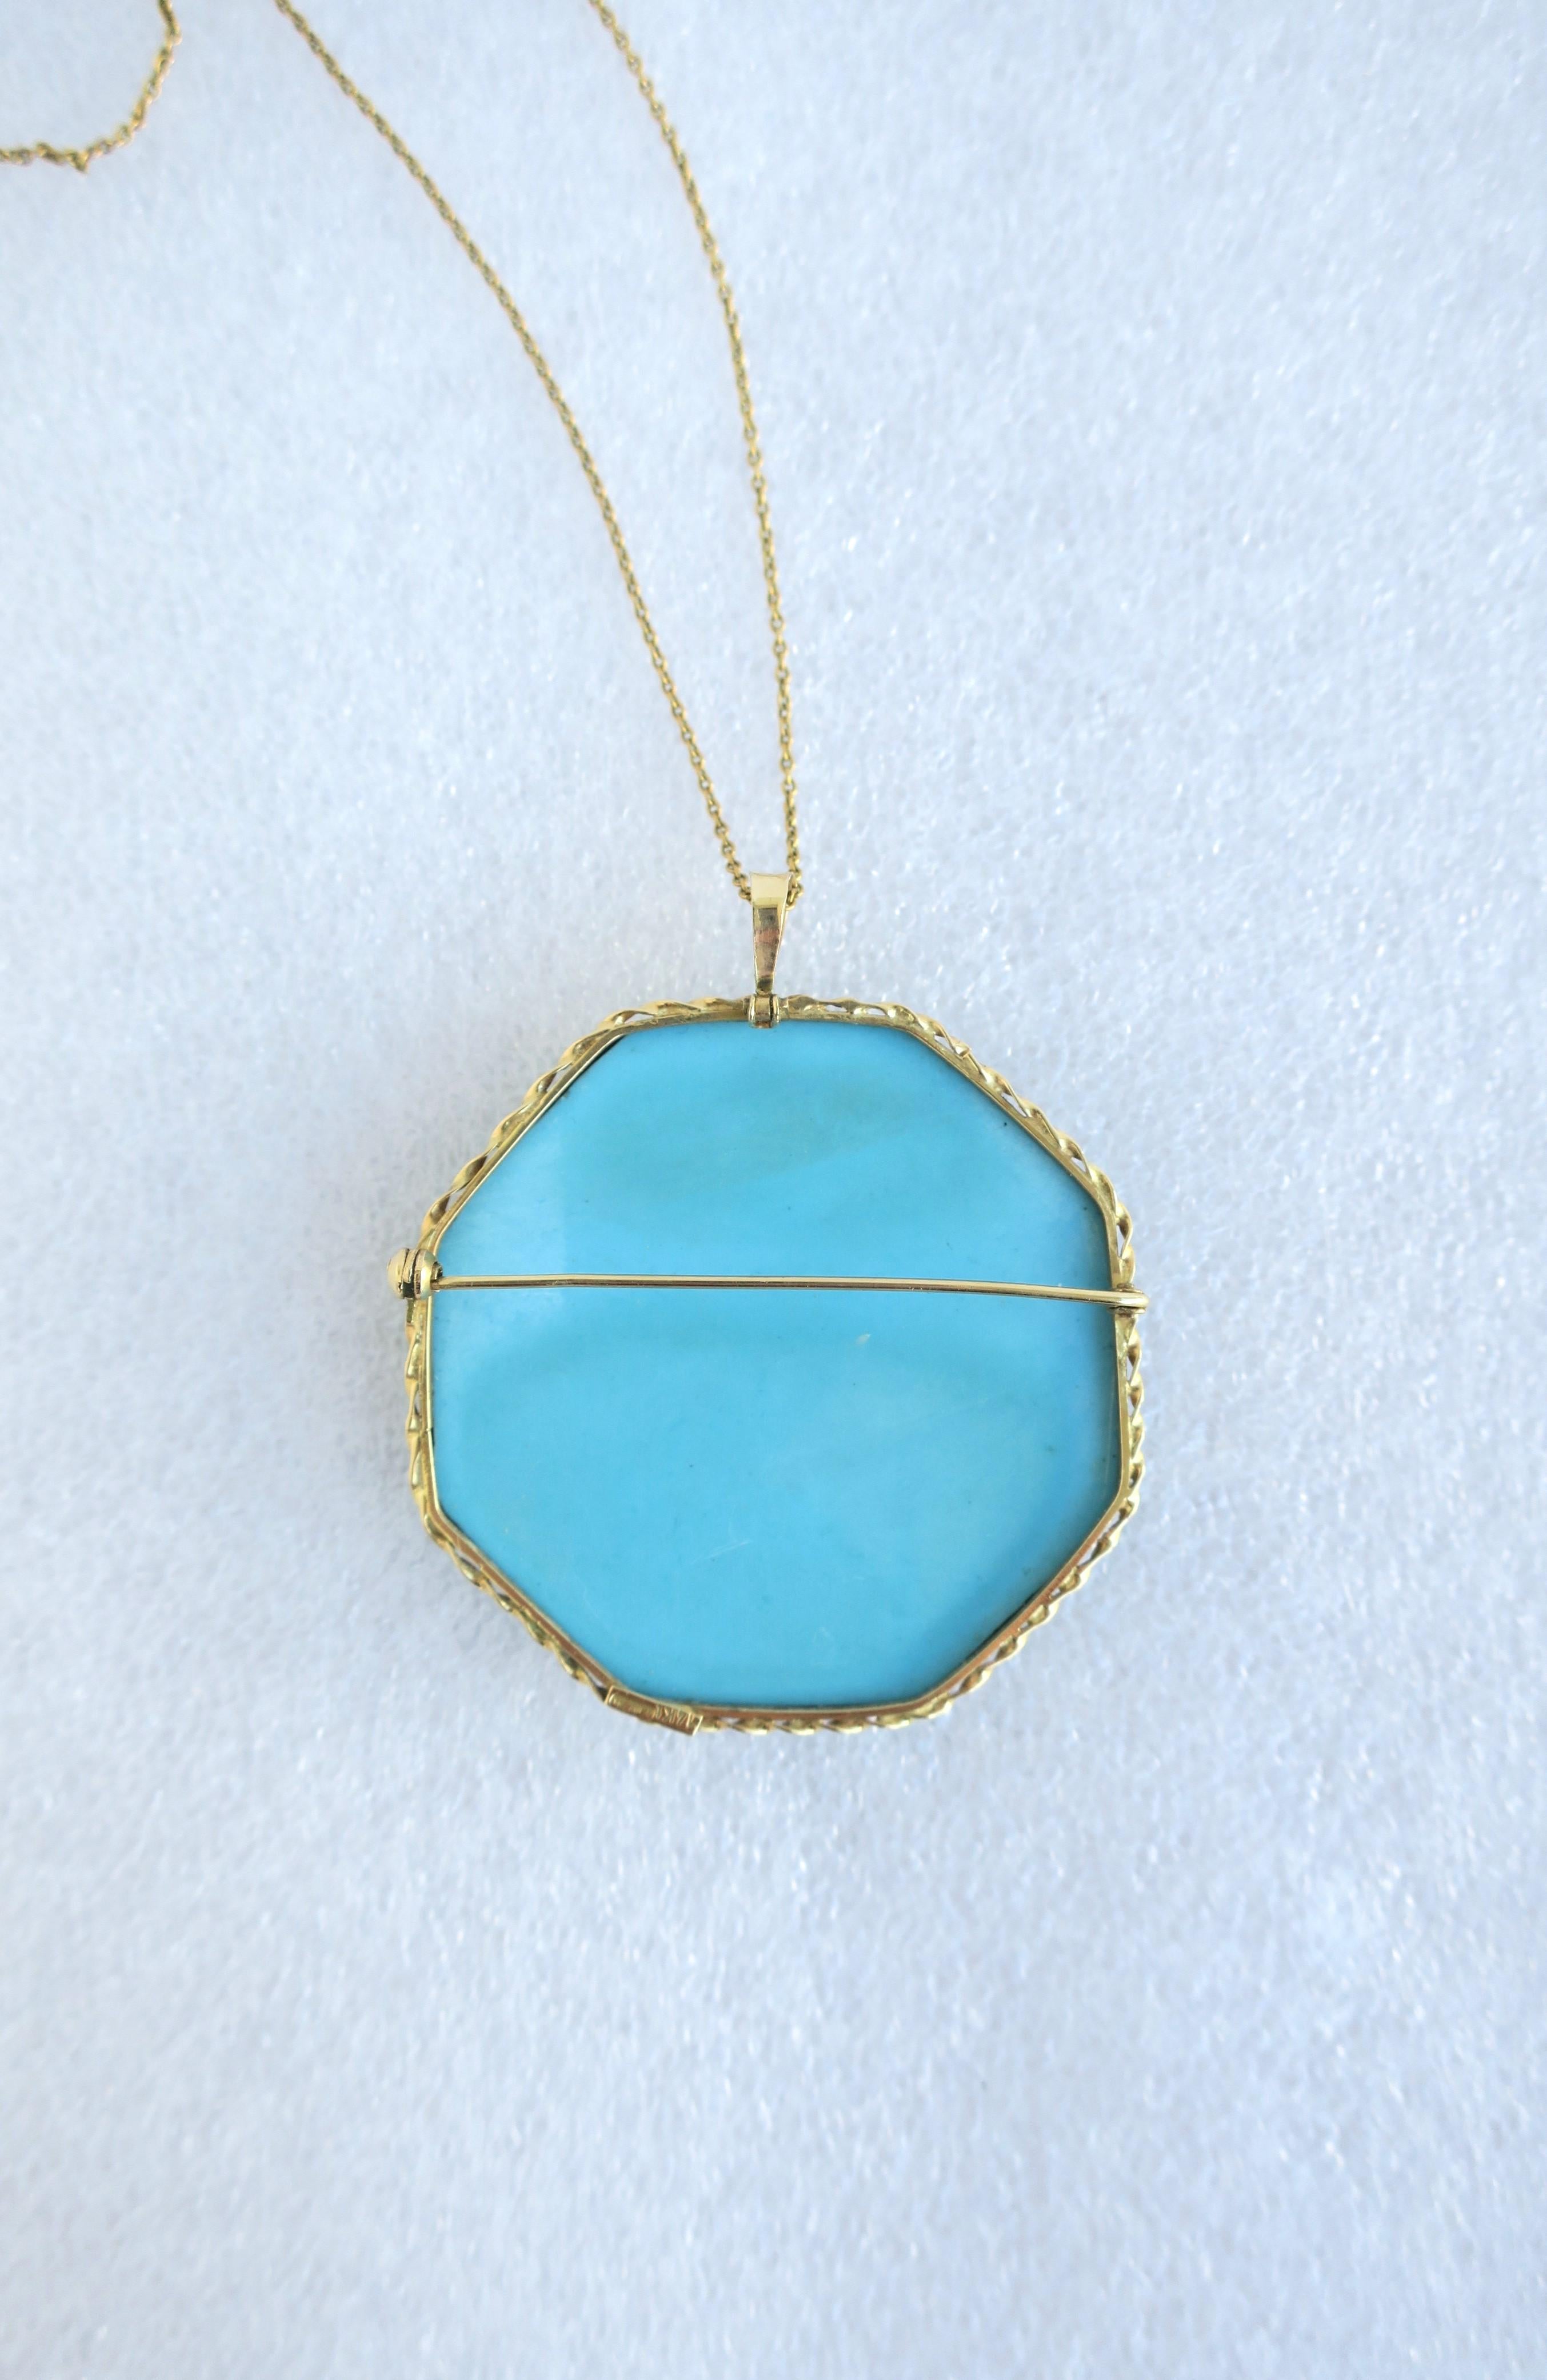 Italian Gold and Turquoise Pendant Necklace and Brooch  For Sale 8